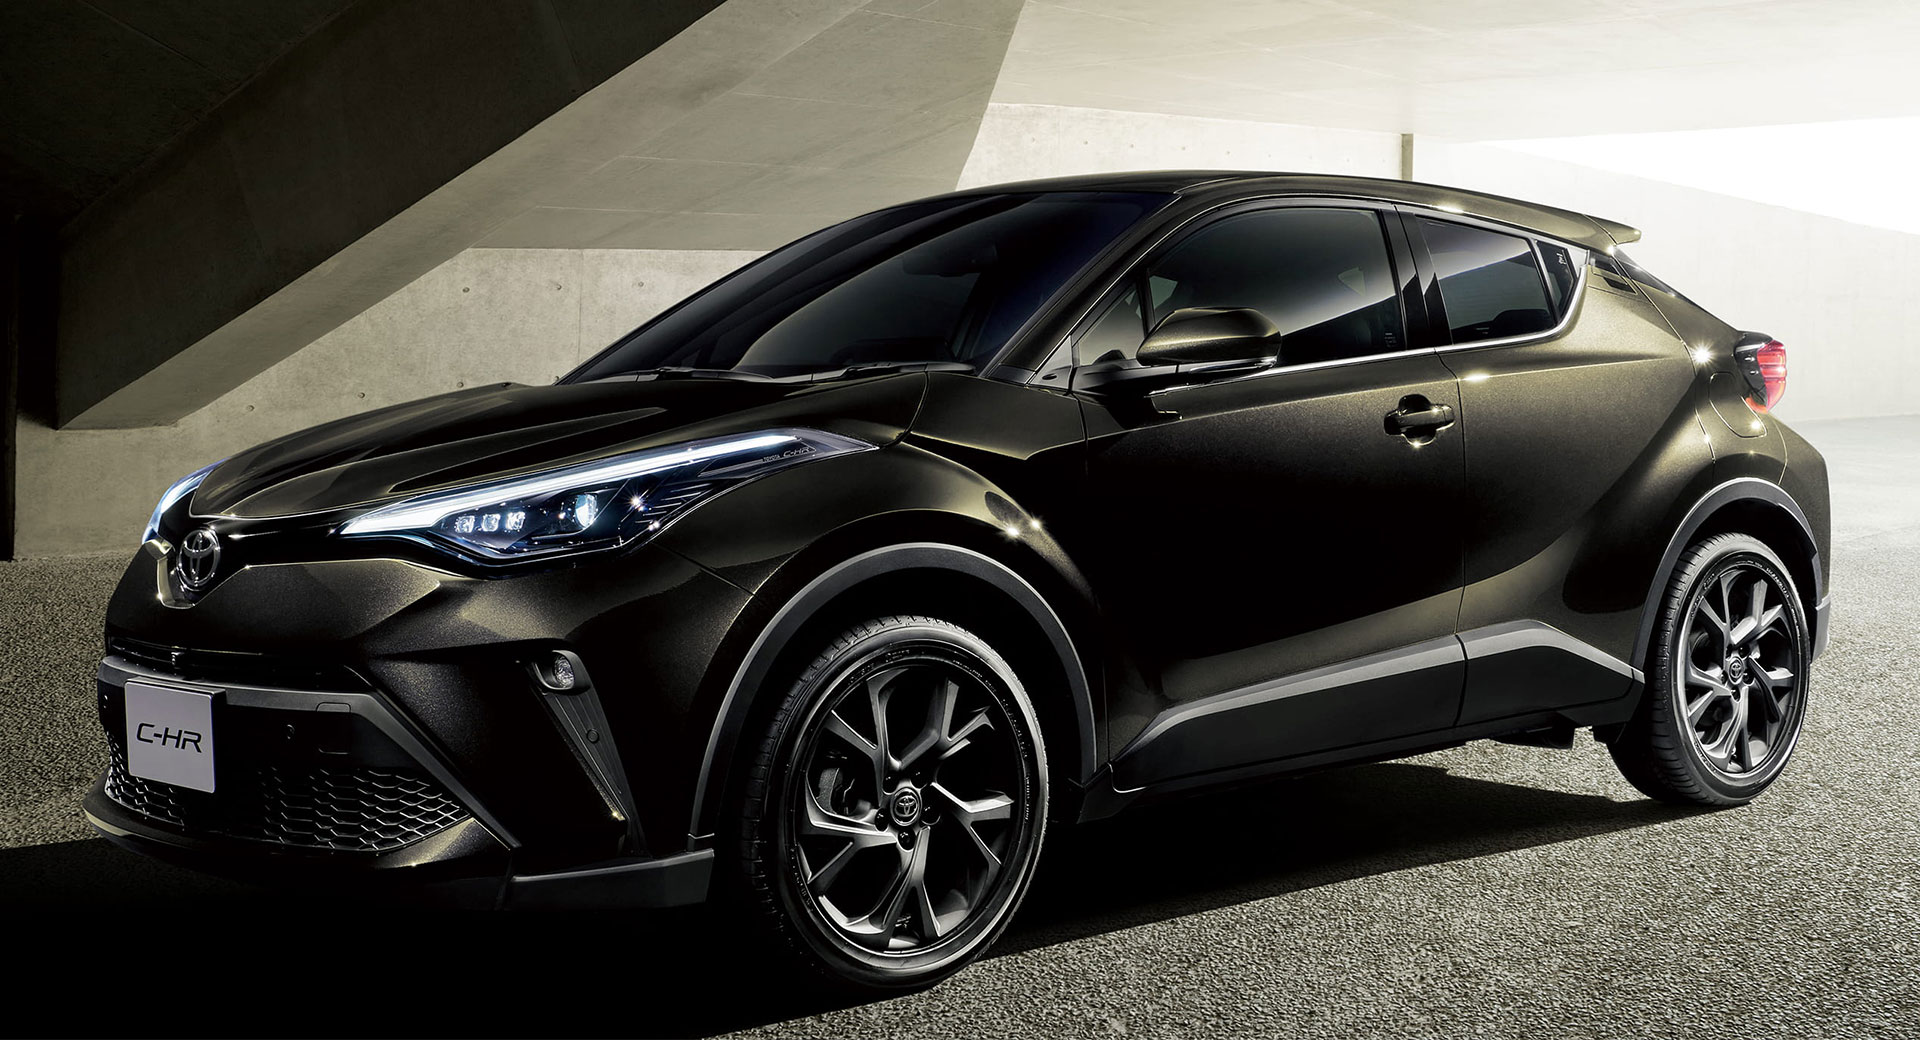 2022 Toyota C-HR Review, Pricing, and Specs